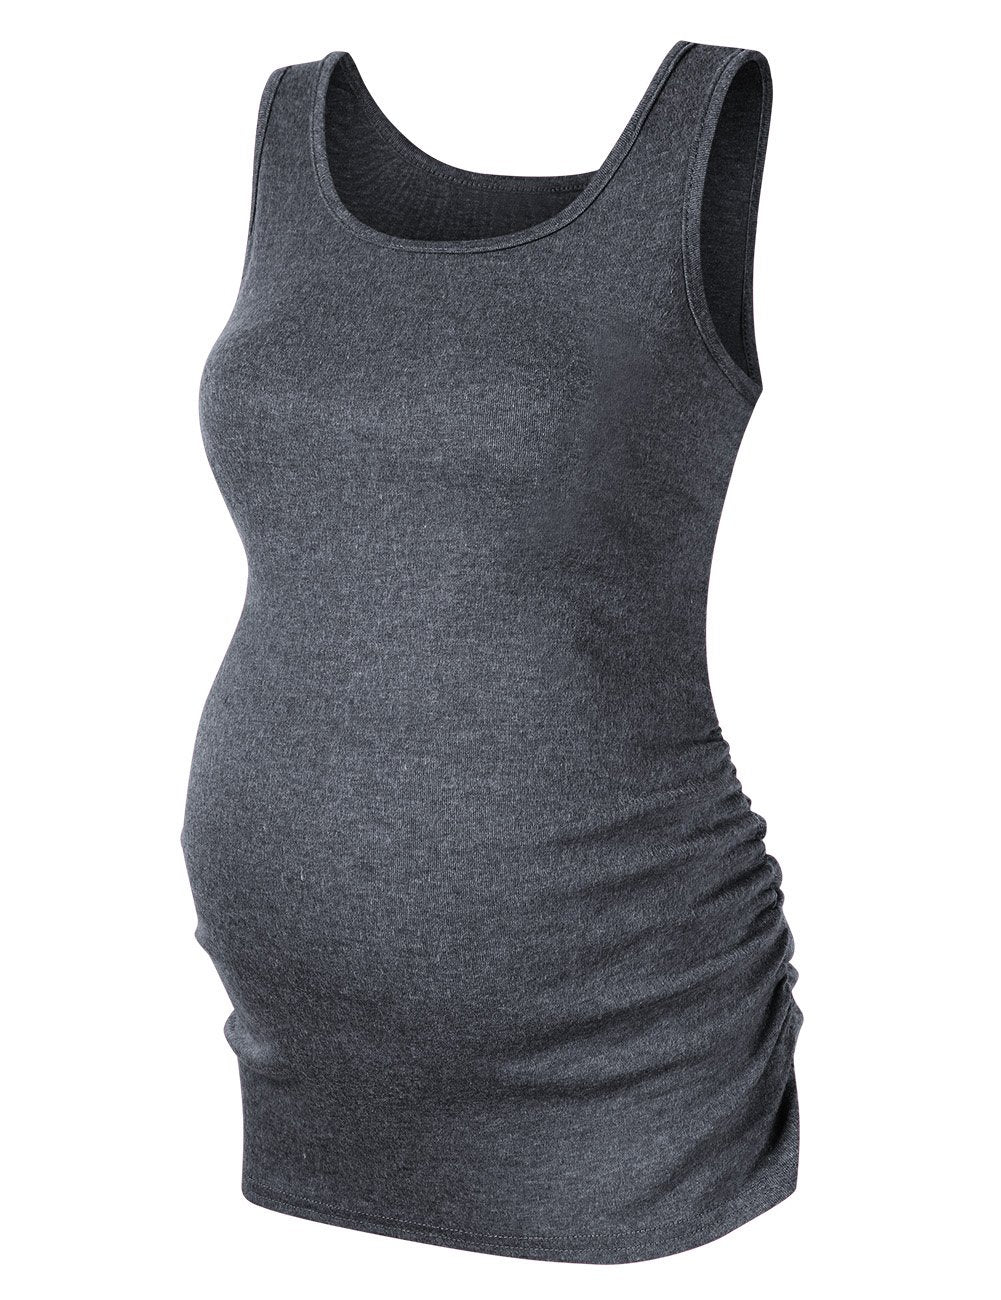 Maternity Basic Tank Top Neck Sleeveless Tops Pregnancy Solid Side Ruching Vest